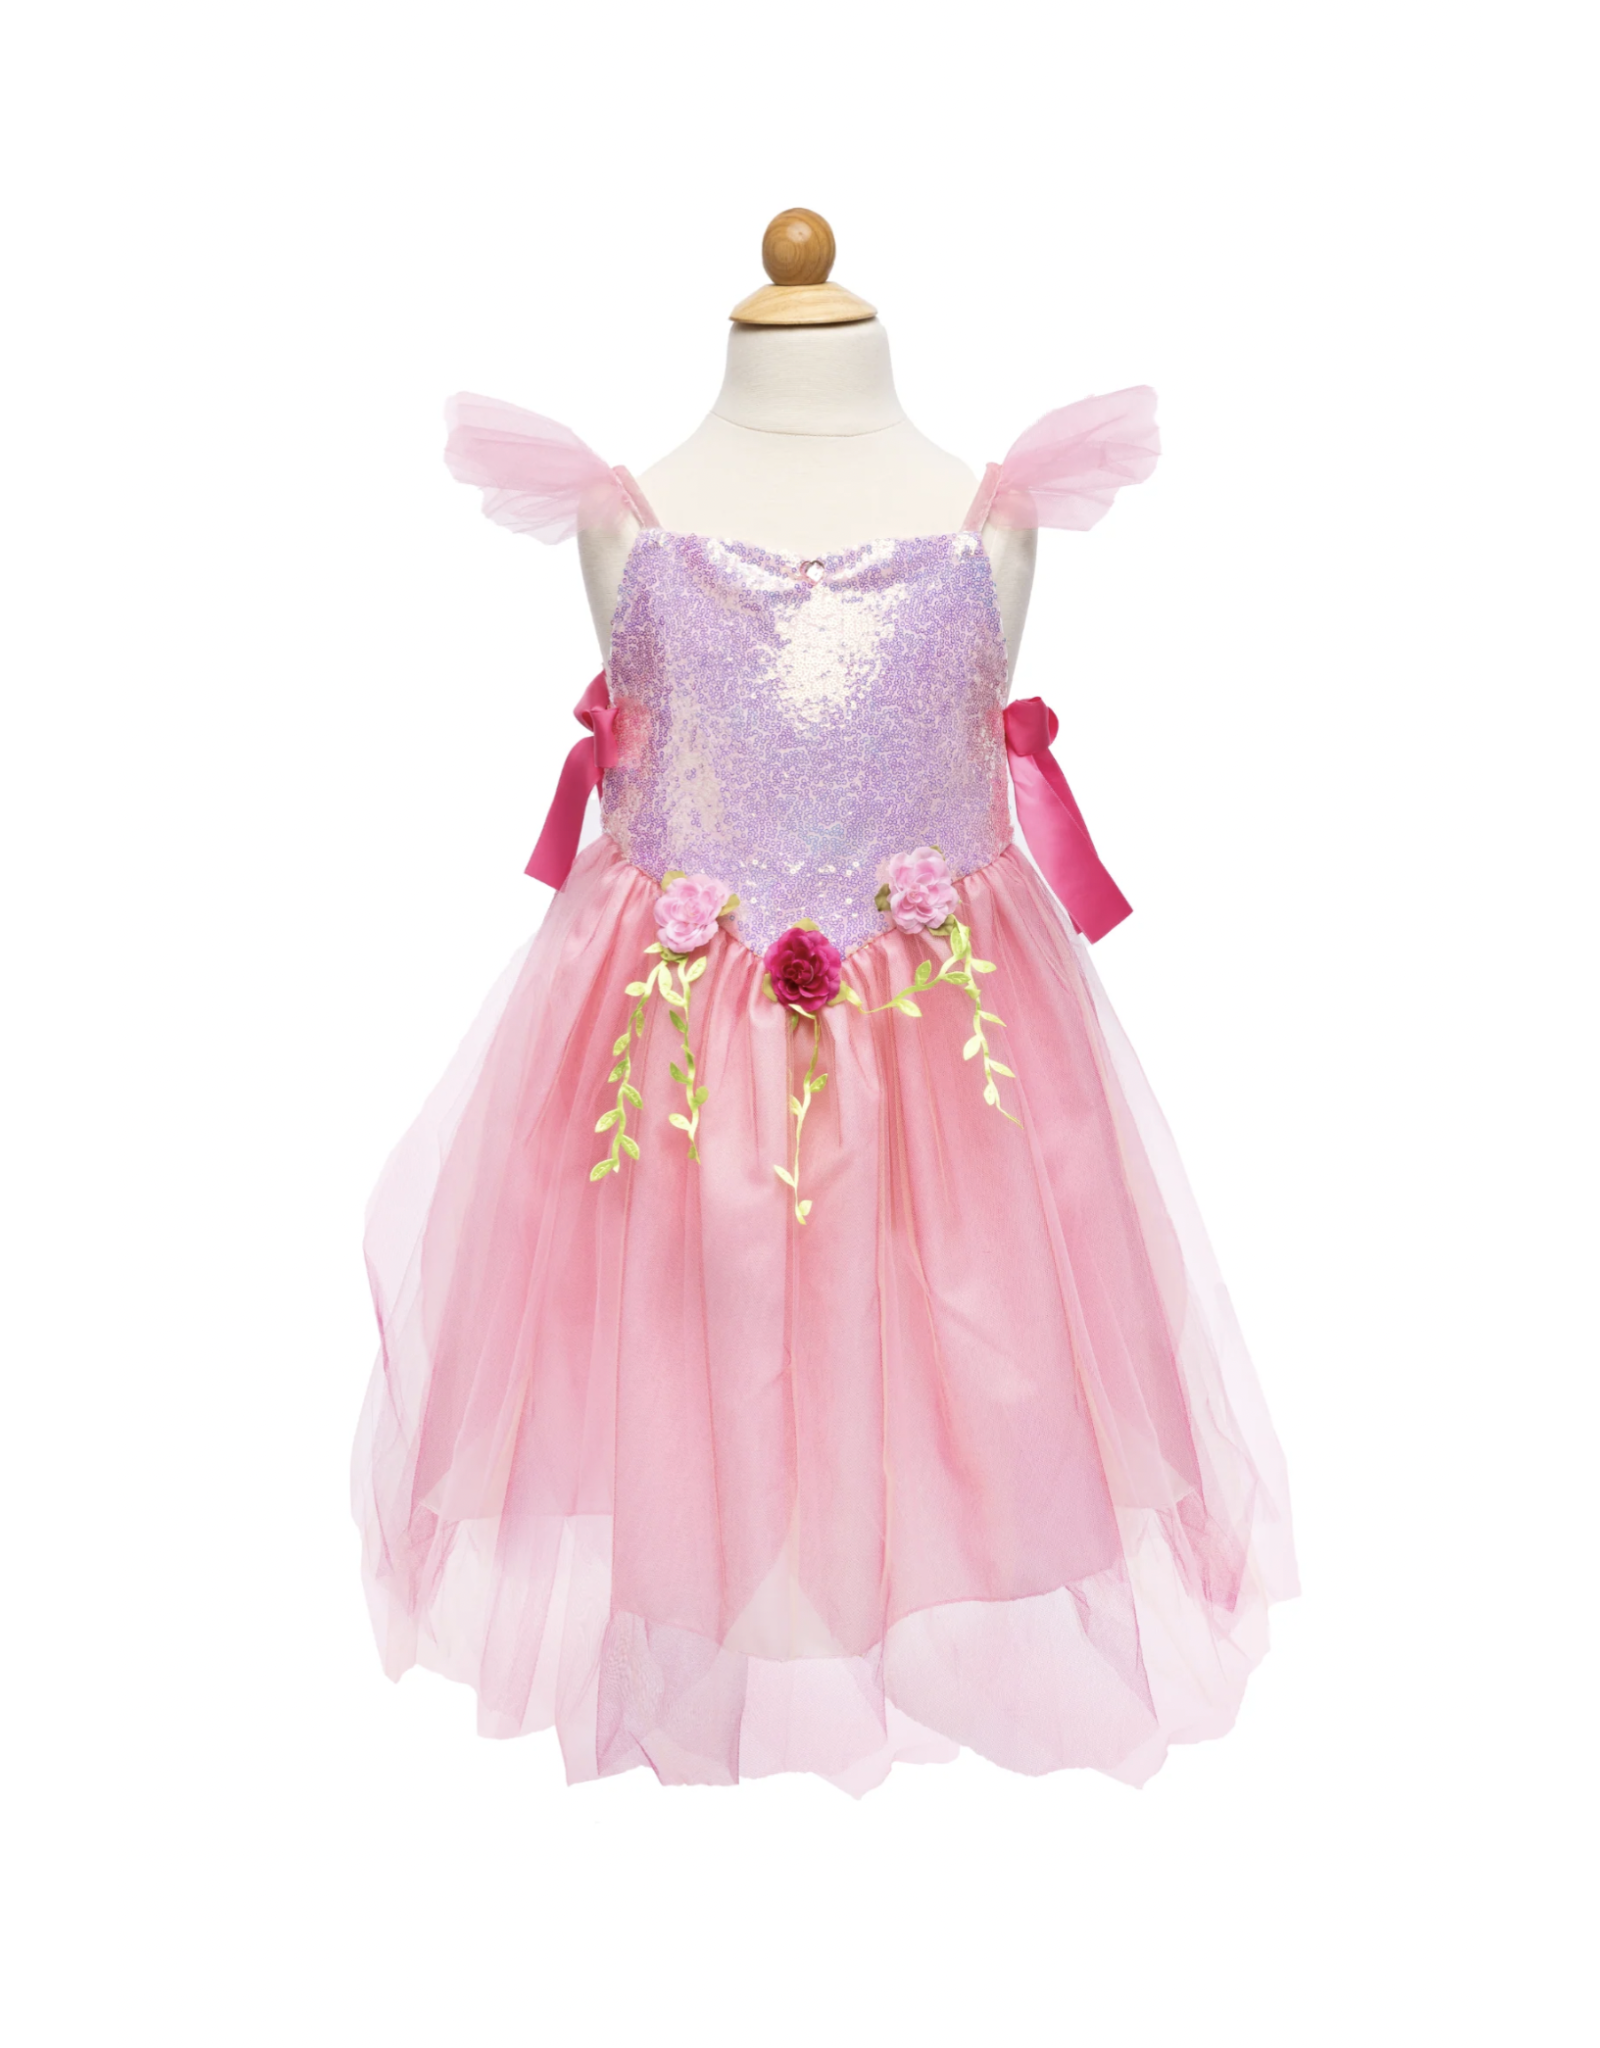 Great Pretenders Pink Sequins Fairy Tunic, Size 3/4